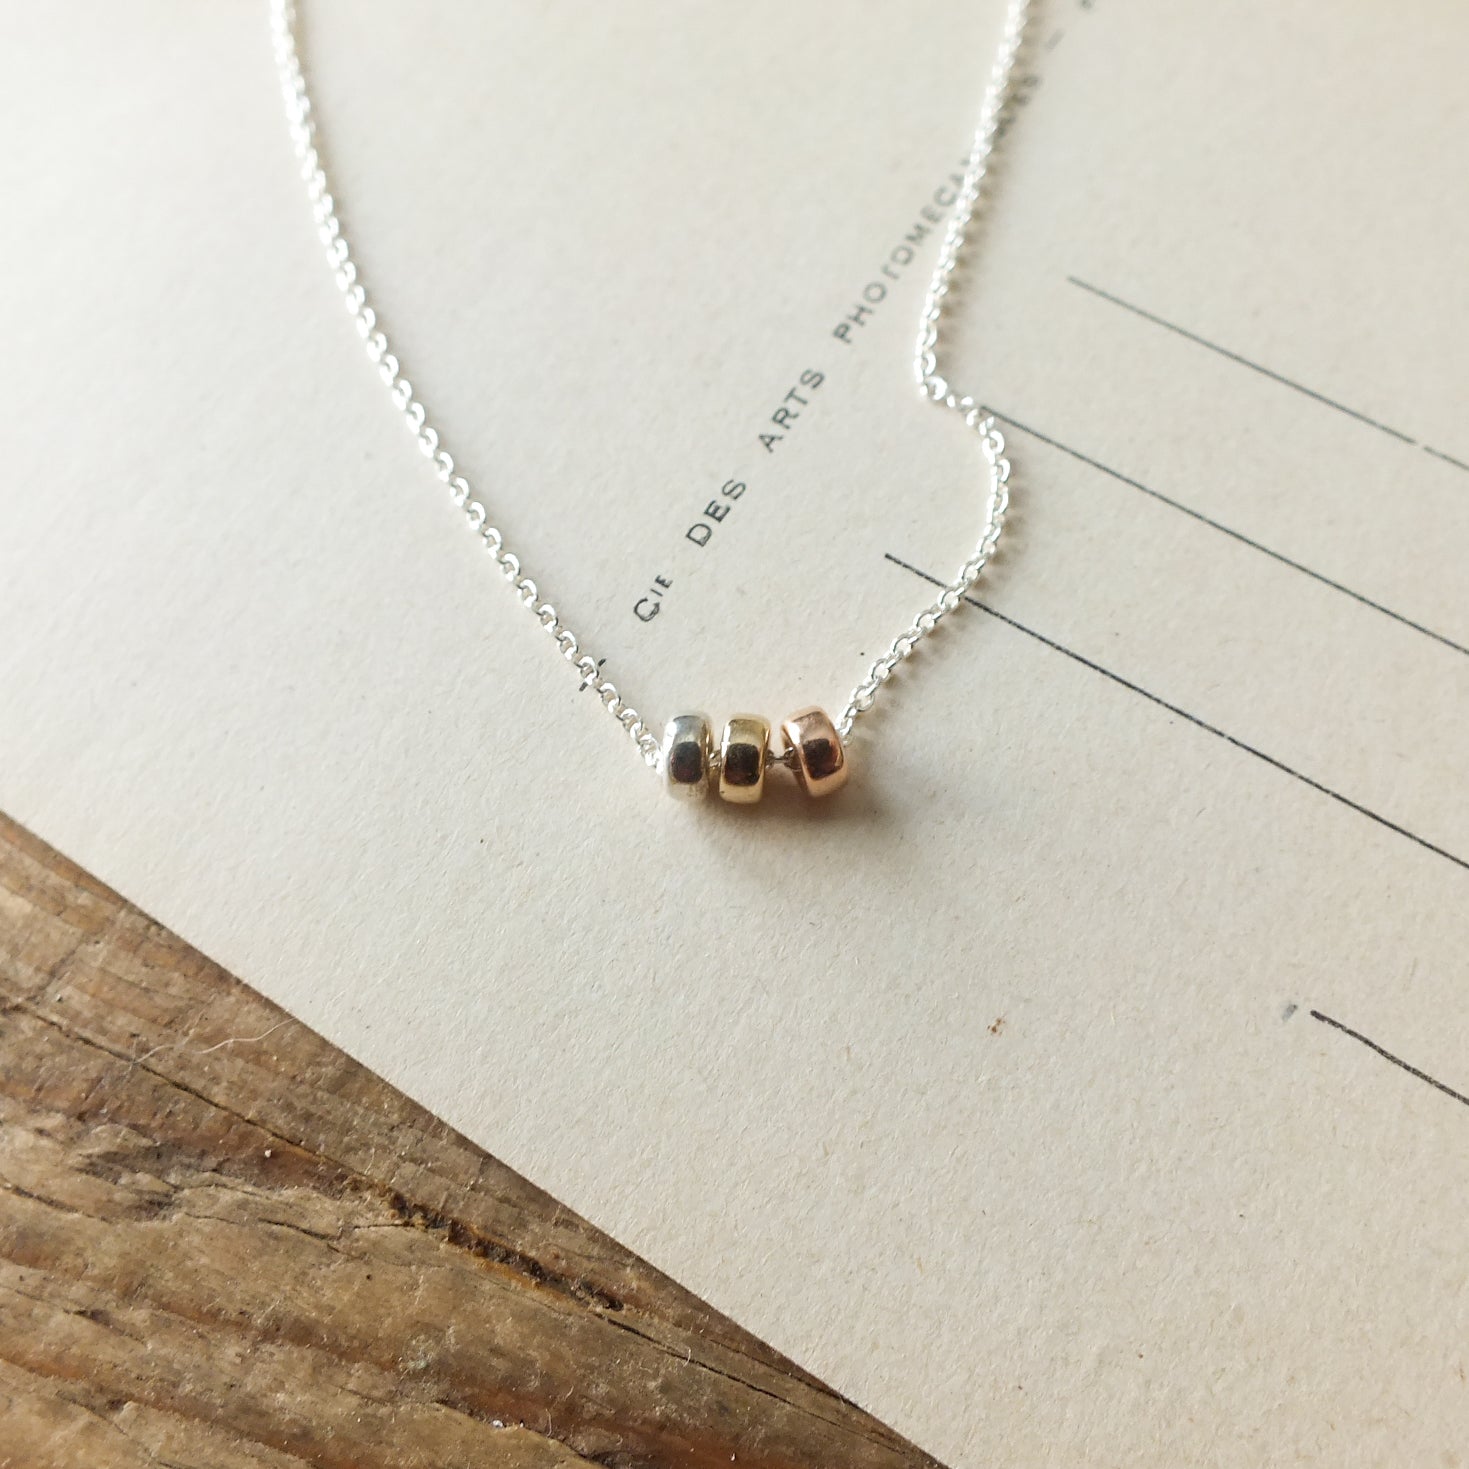 A delicate Three Things Necklace with three mixed metal beads displayed on a piece of paper by Becoming Jewelry.